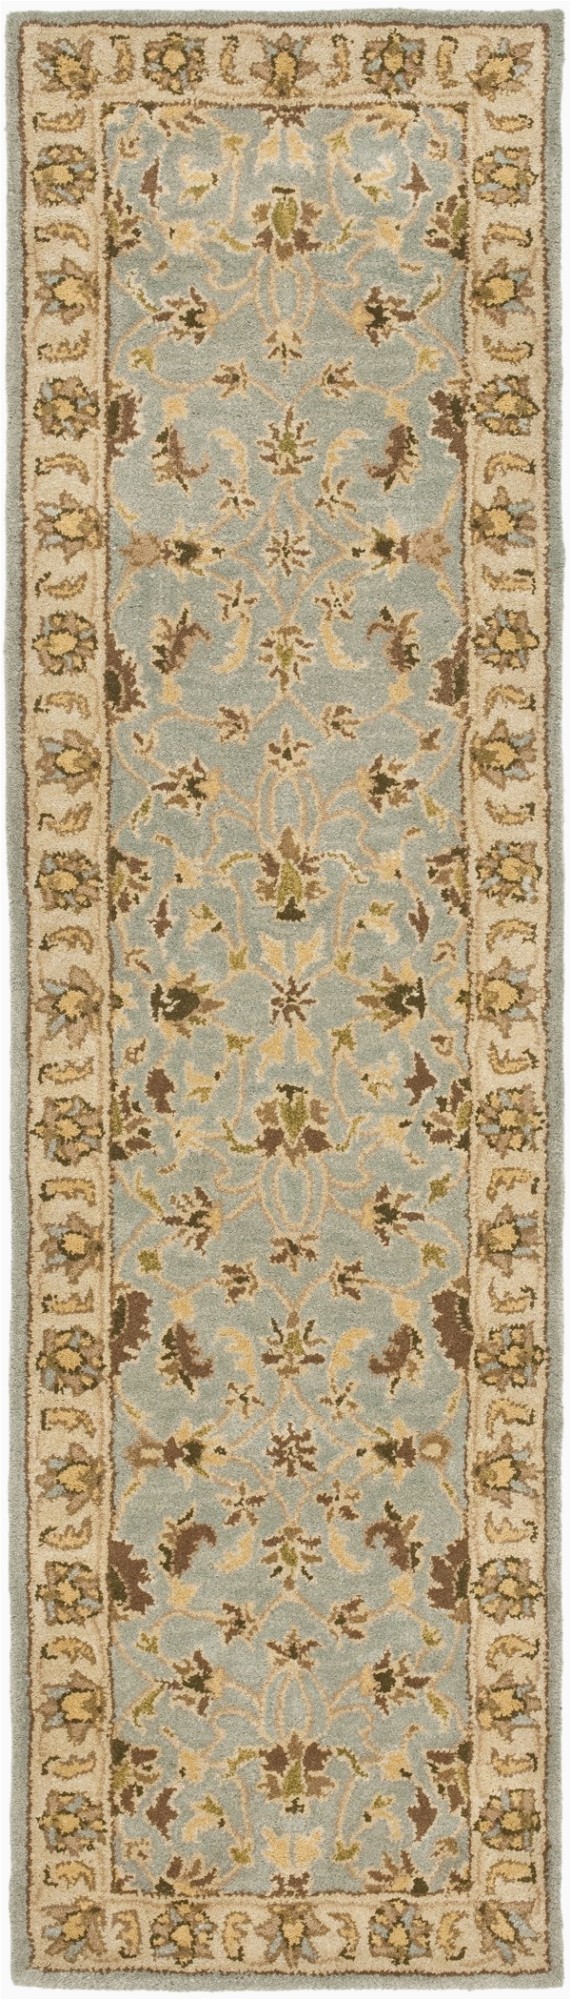 Bed Bath and Beyond area Rugs 6×9 Safavieh Heritage Hg 913 area Rugs